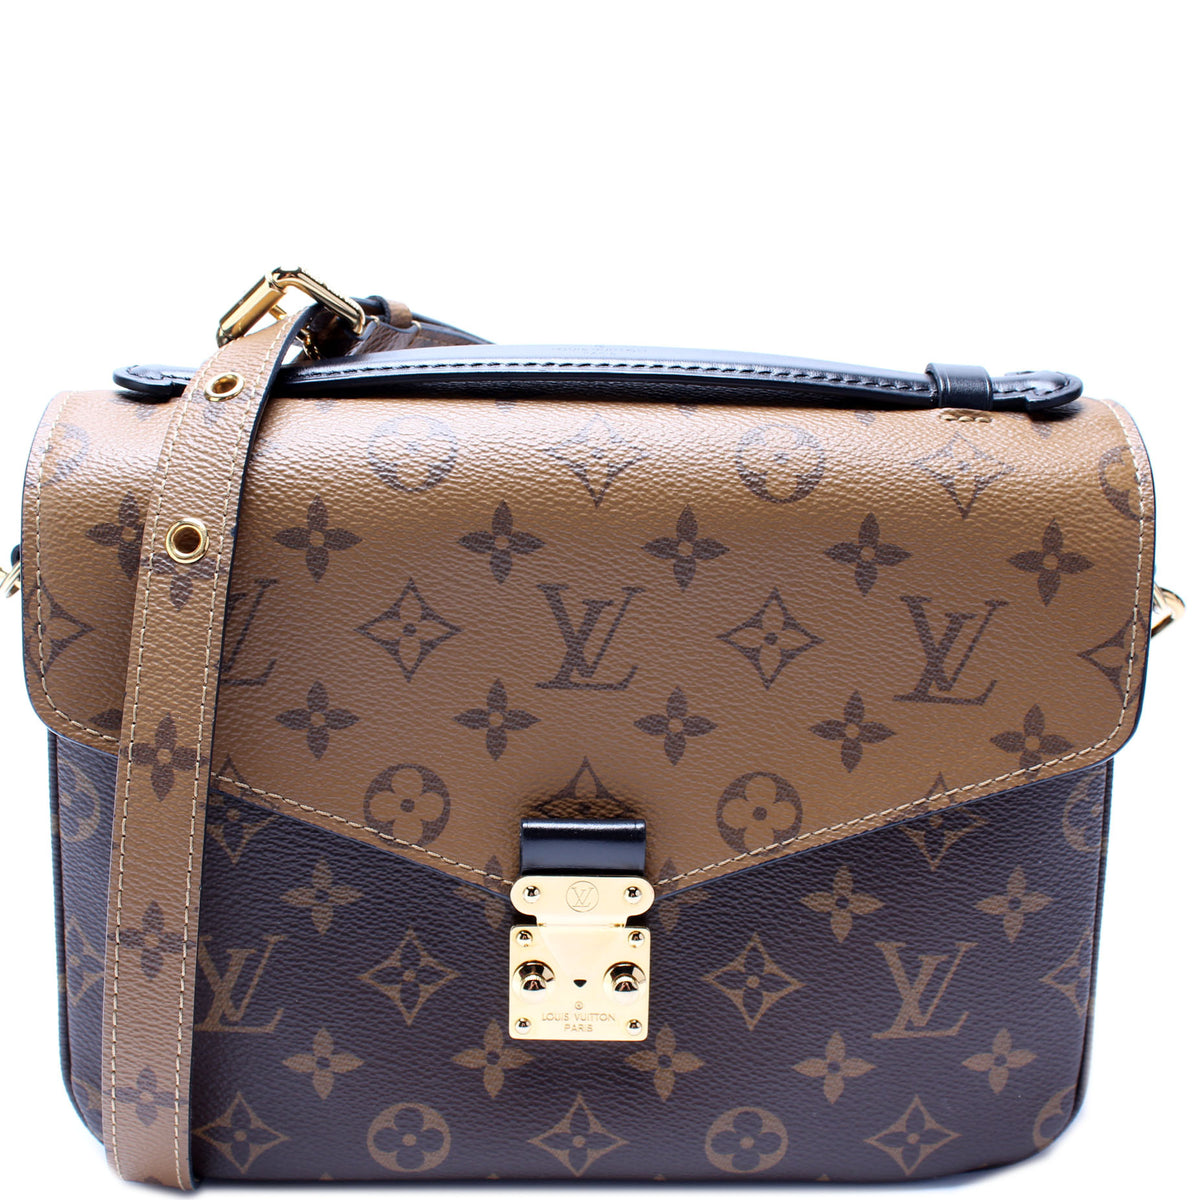 Louis Vuitton Pochette Metis Review, 1 Year Wear and Tear